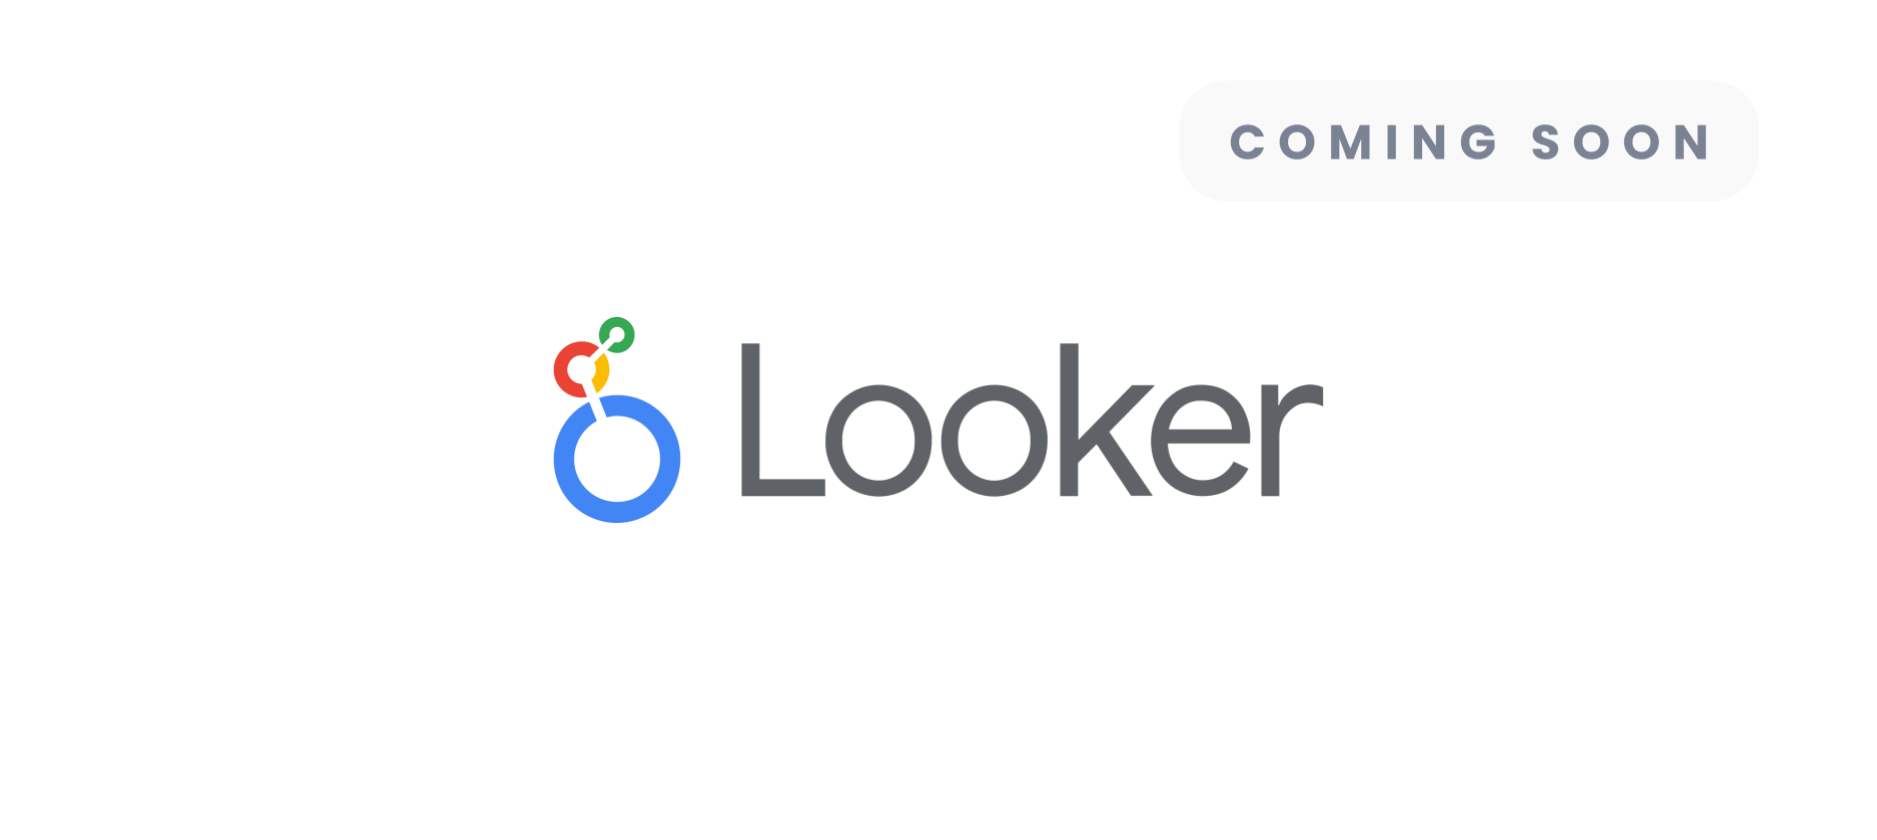 Business Intelligence - Looker - Coming soon